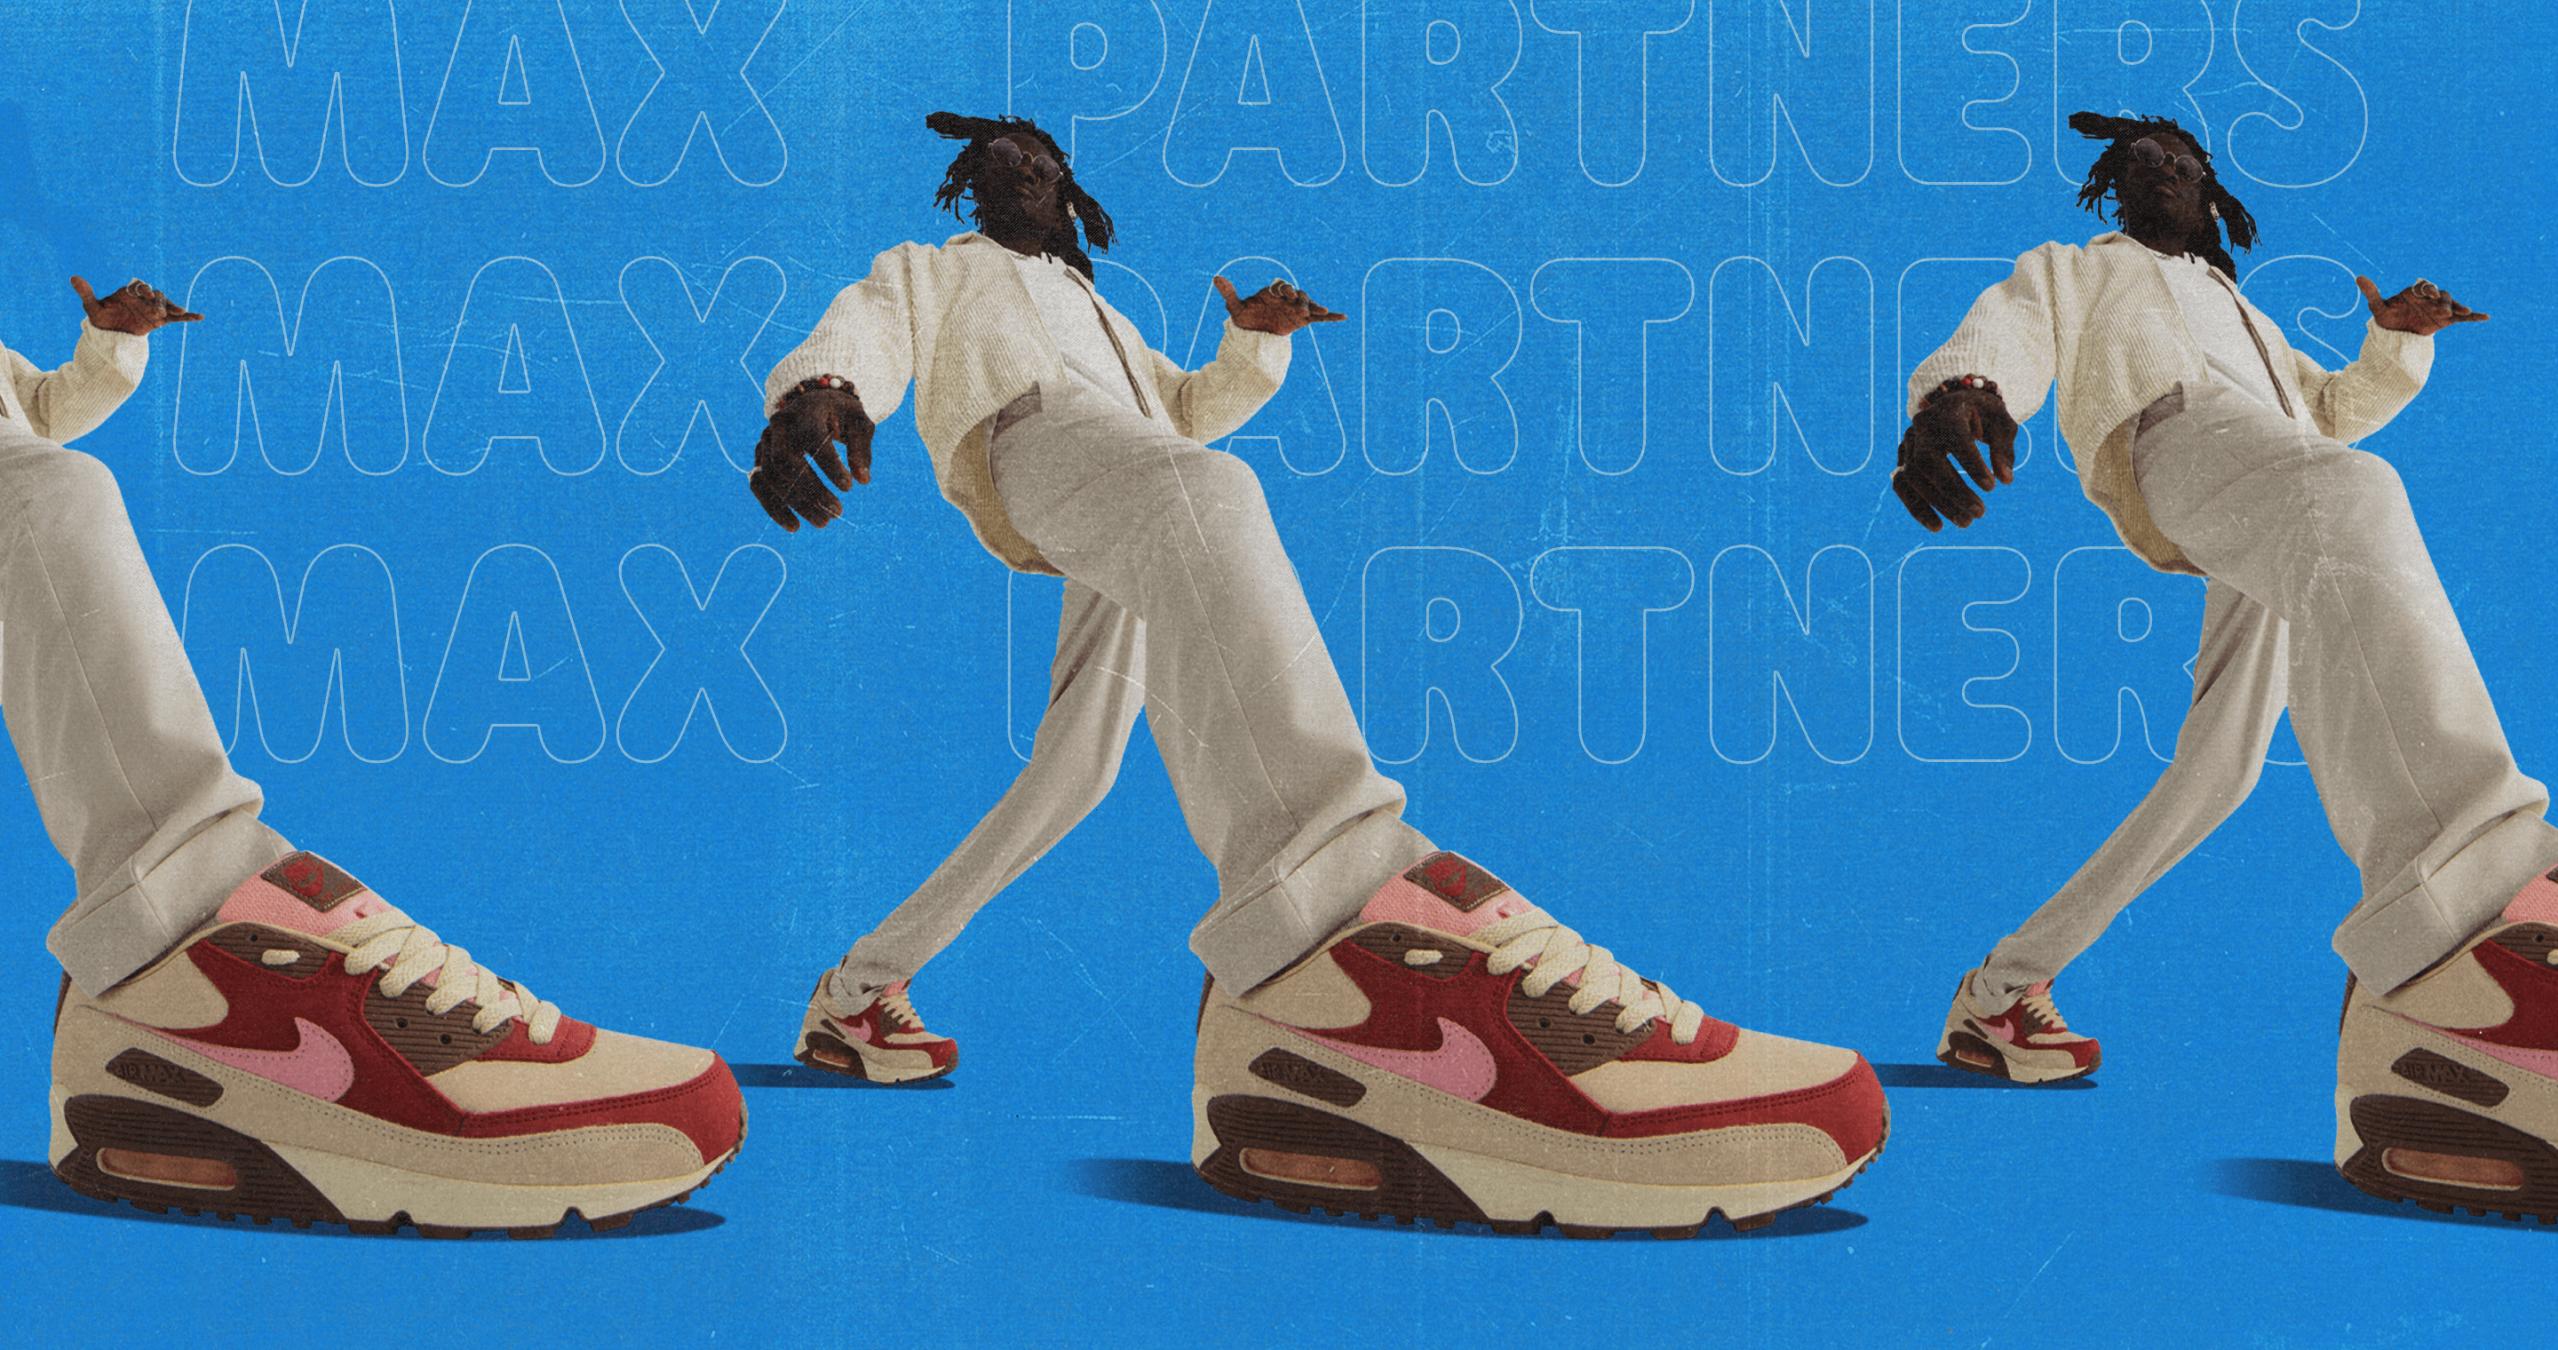 Nike Air Max Day: 7 of the Most Classic Air Max References in Hip